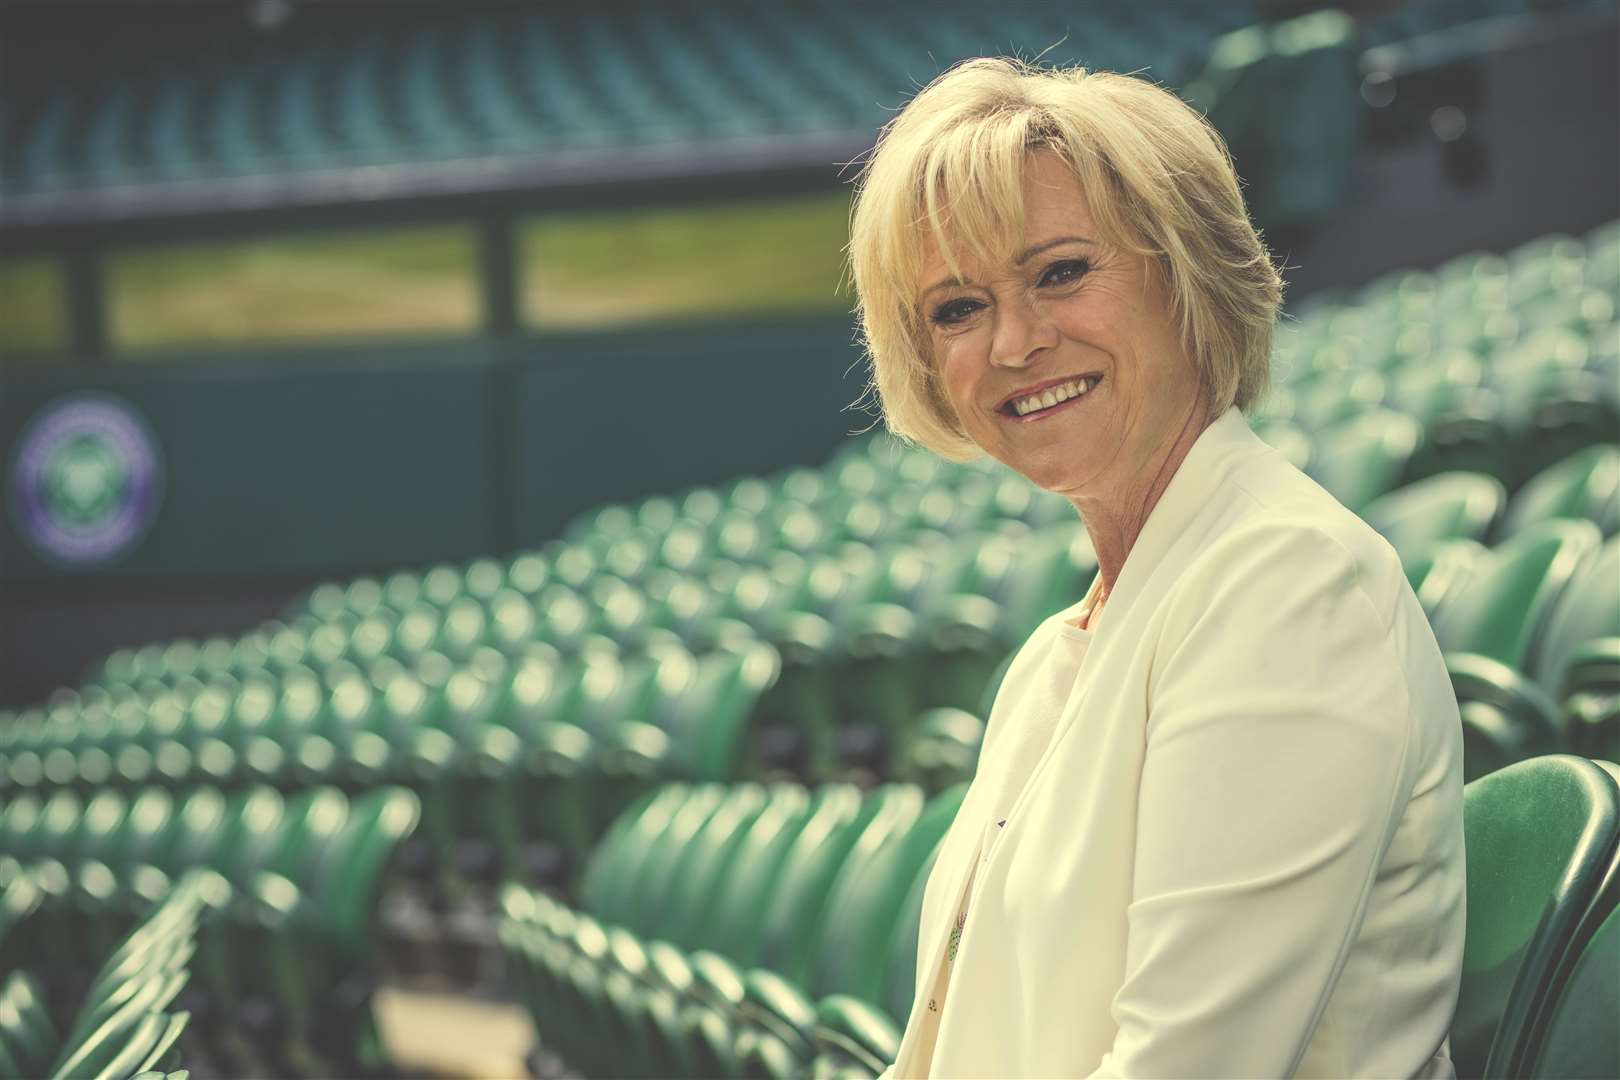 Sue Barker will host the BBC's tennis output during Wimbeldon fortnight.